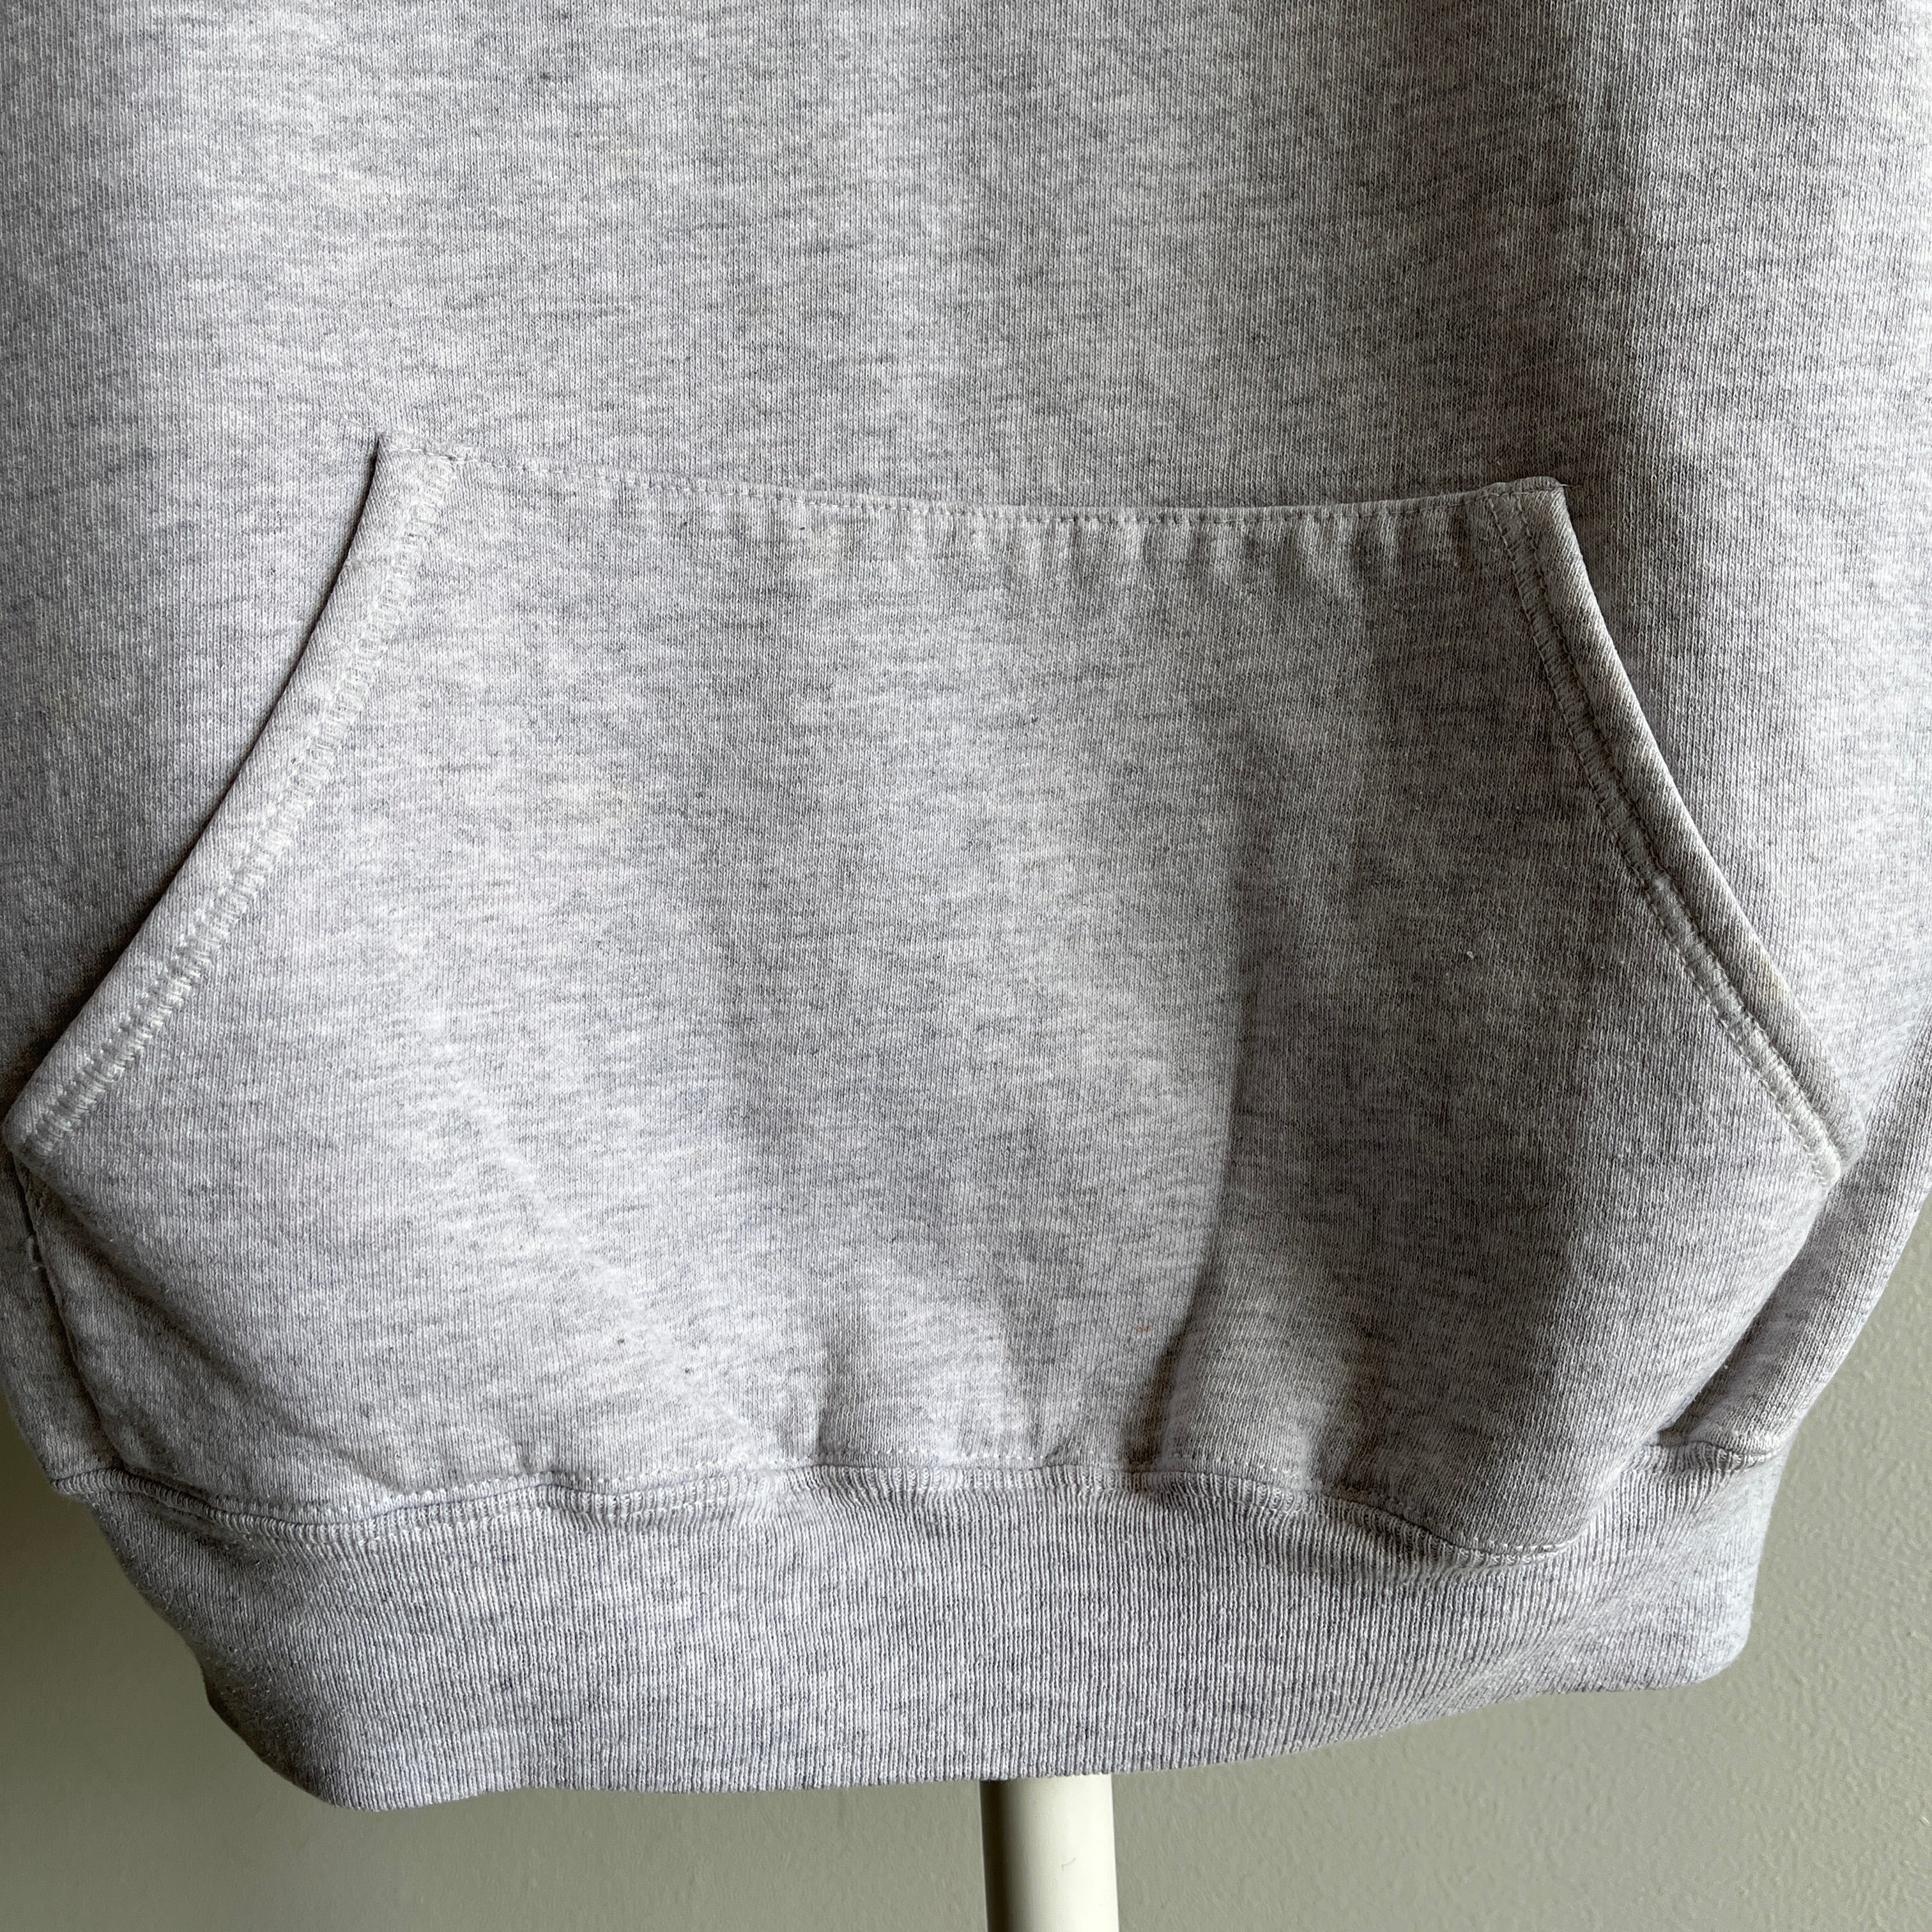 1980s Cut Neck Nicely Stained Sweatshirt by Super Sweats